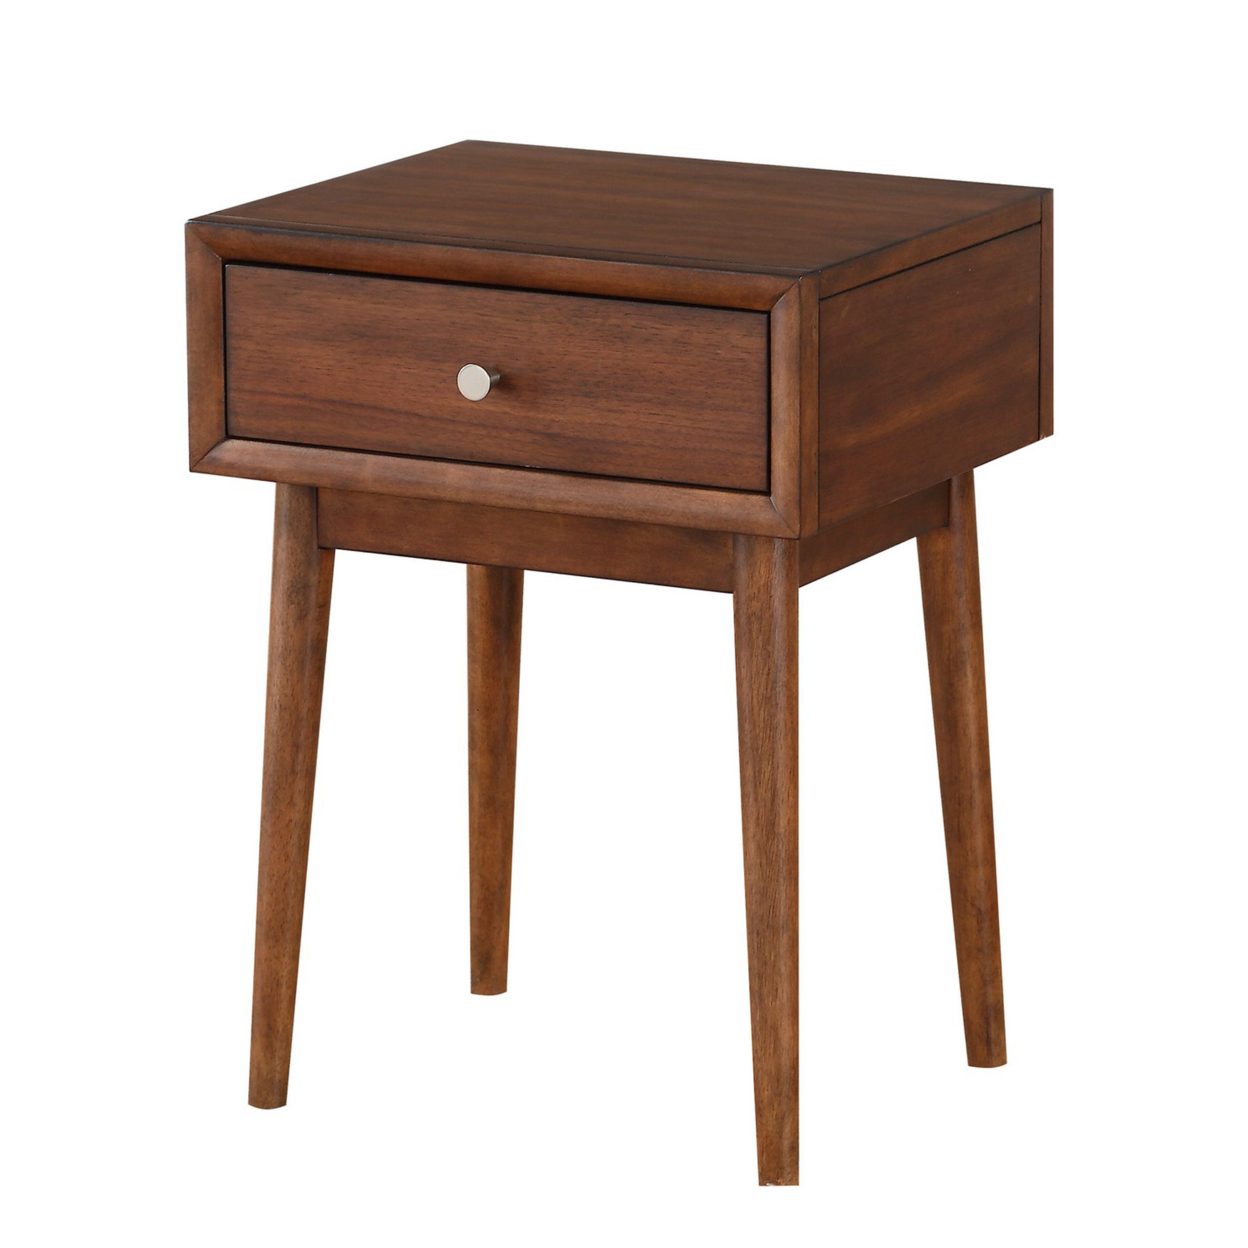 1 Drawer Wooden End Table With Splayed Legs, Walnut Brown- Saltoro Sherpi